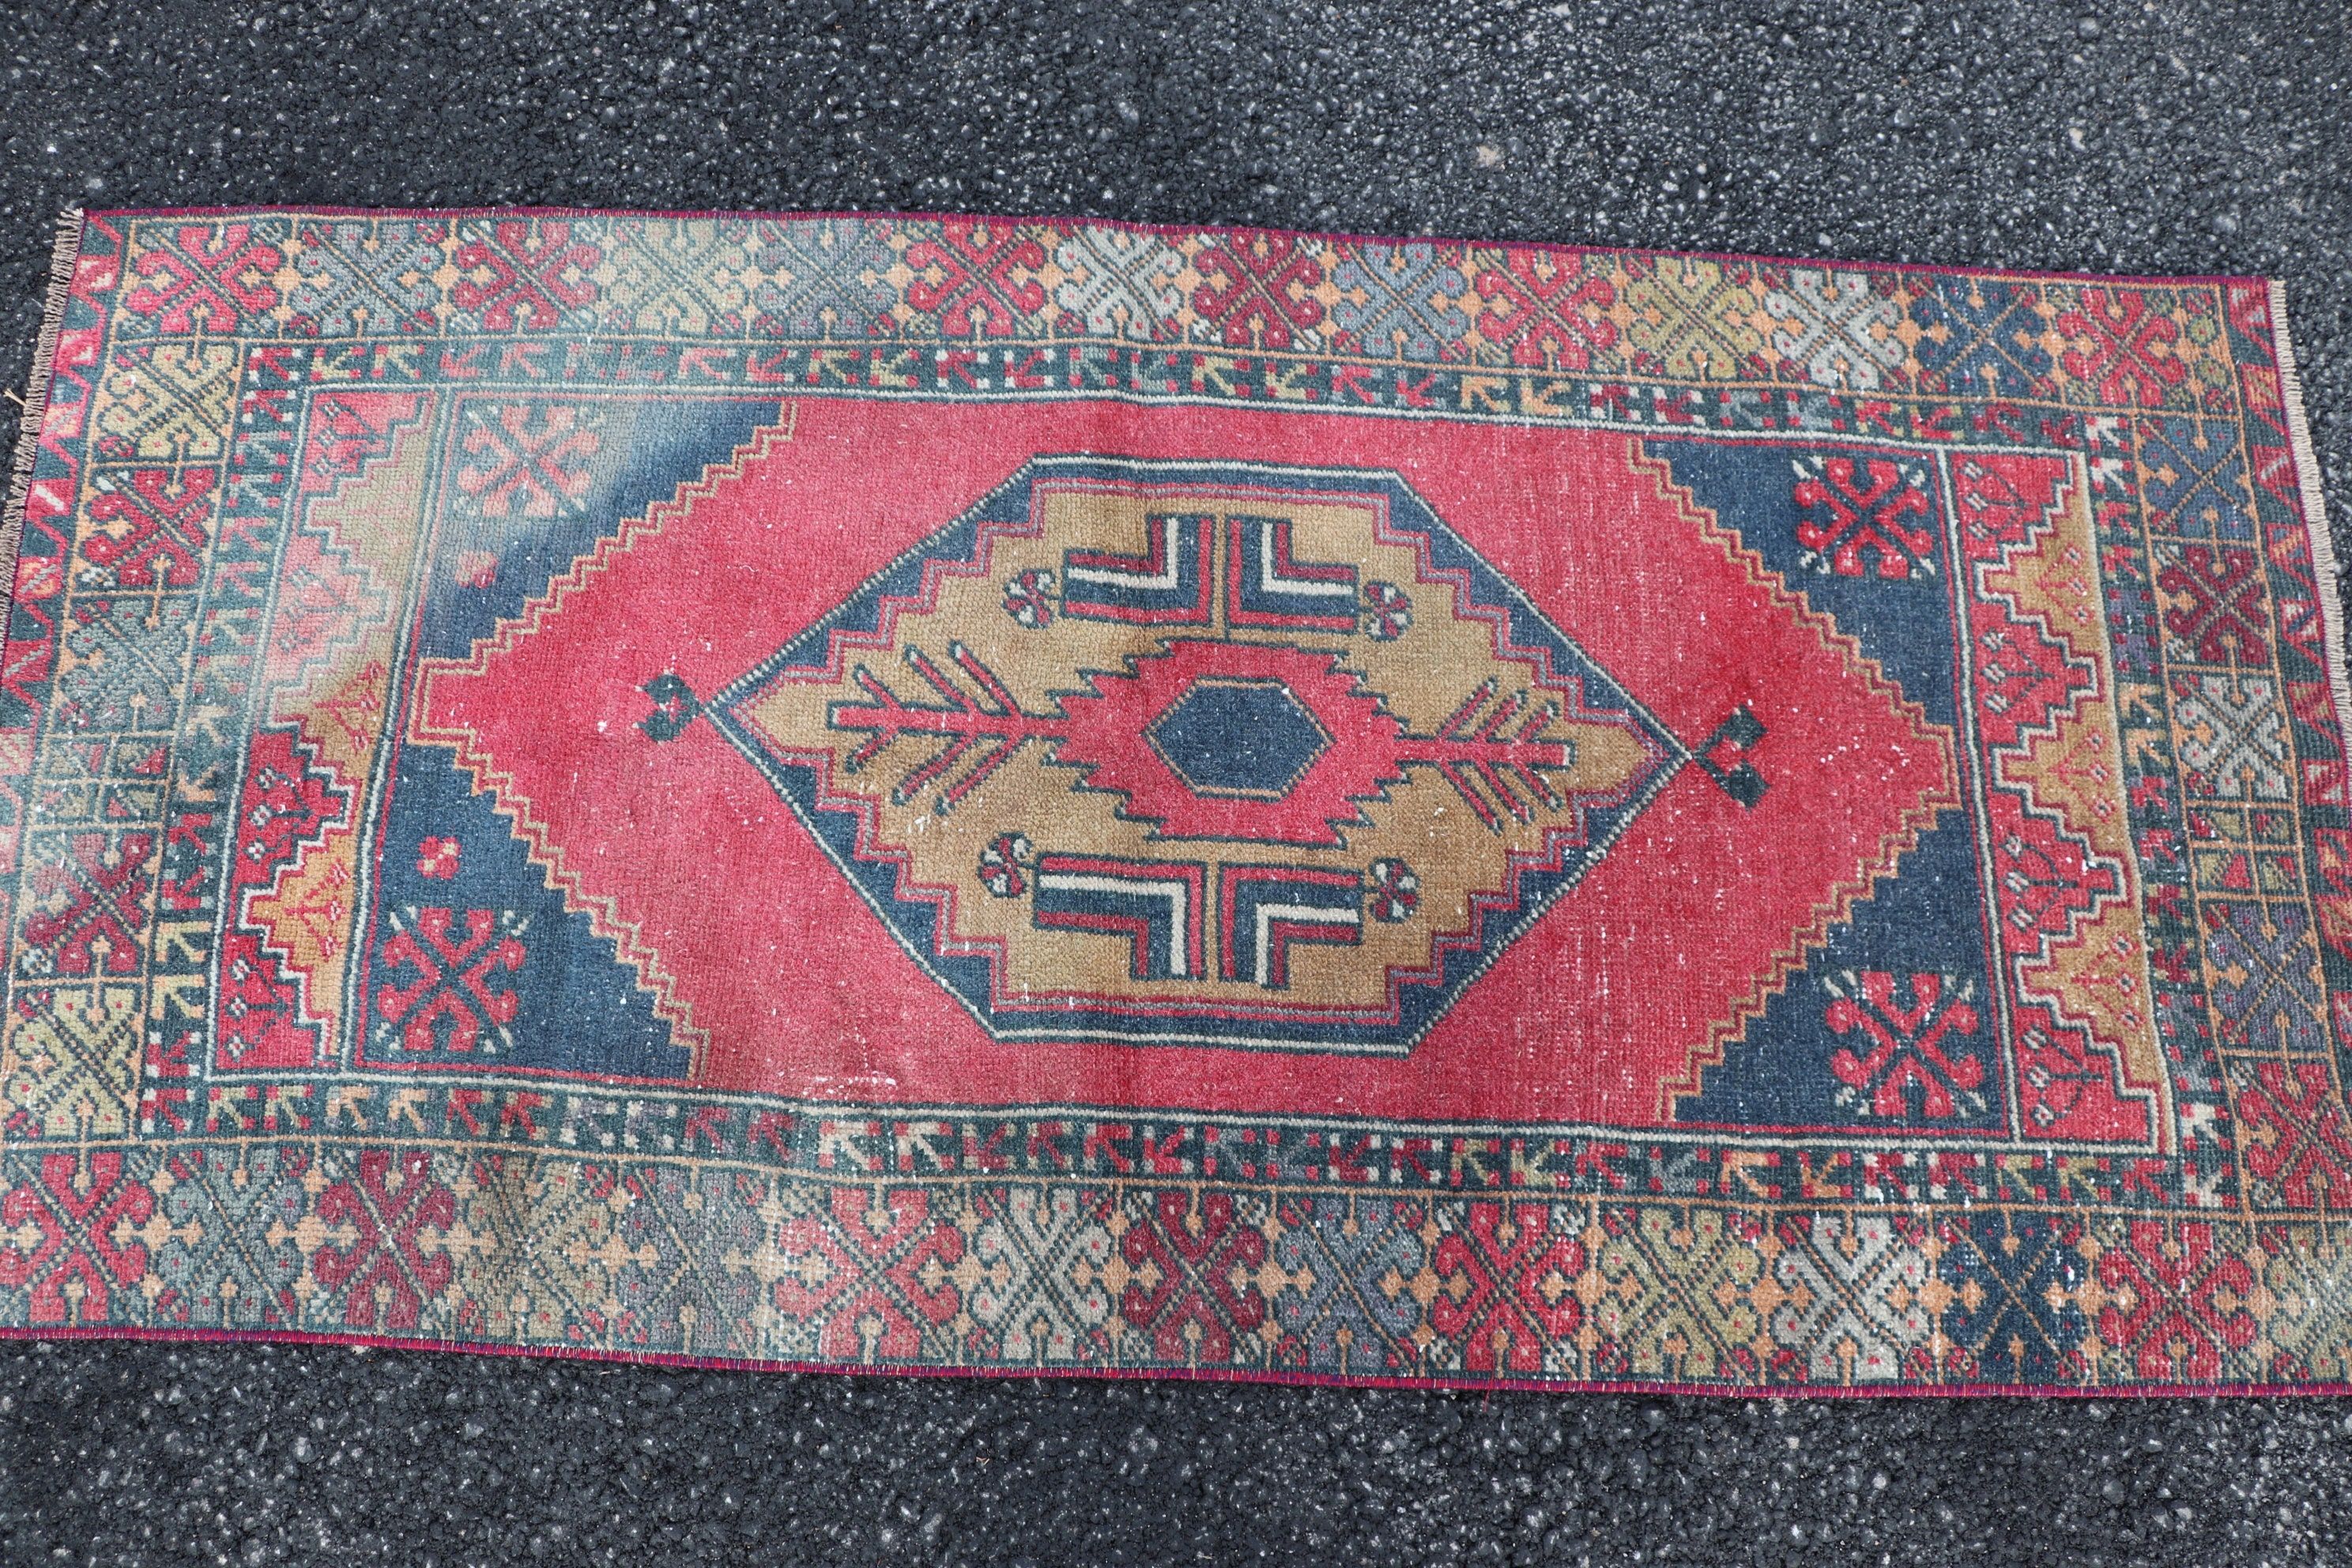 Turkish Rug, Anatolian Rugs, Rugs for Bath, Wall Hanging Rugs, Wool Rug, Red  2.7x5.3 ft Small Rug, Vintage Rug, Kitchen Rug